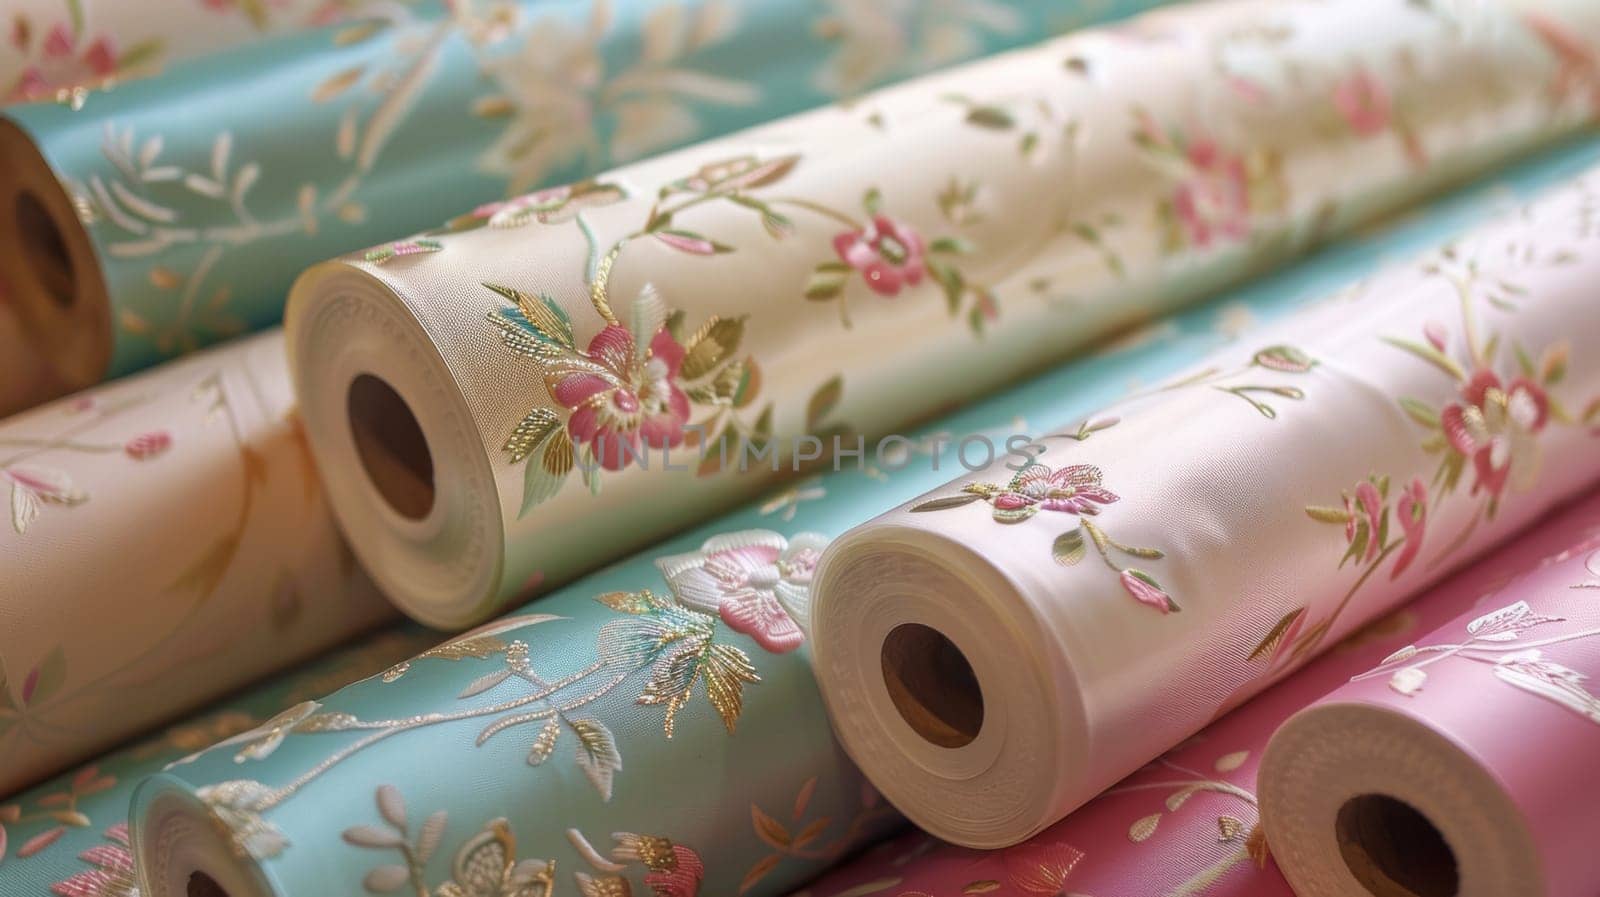 A bunch of rolls of fabric with different designs on them